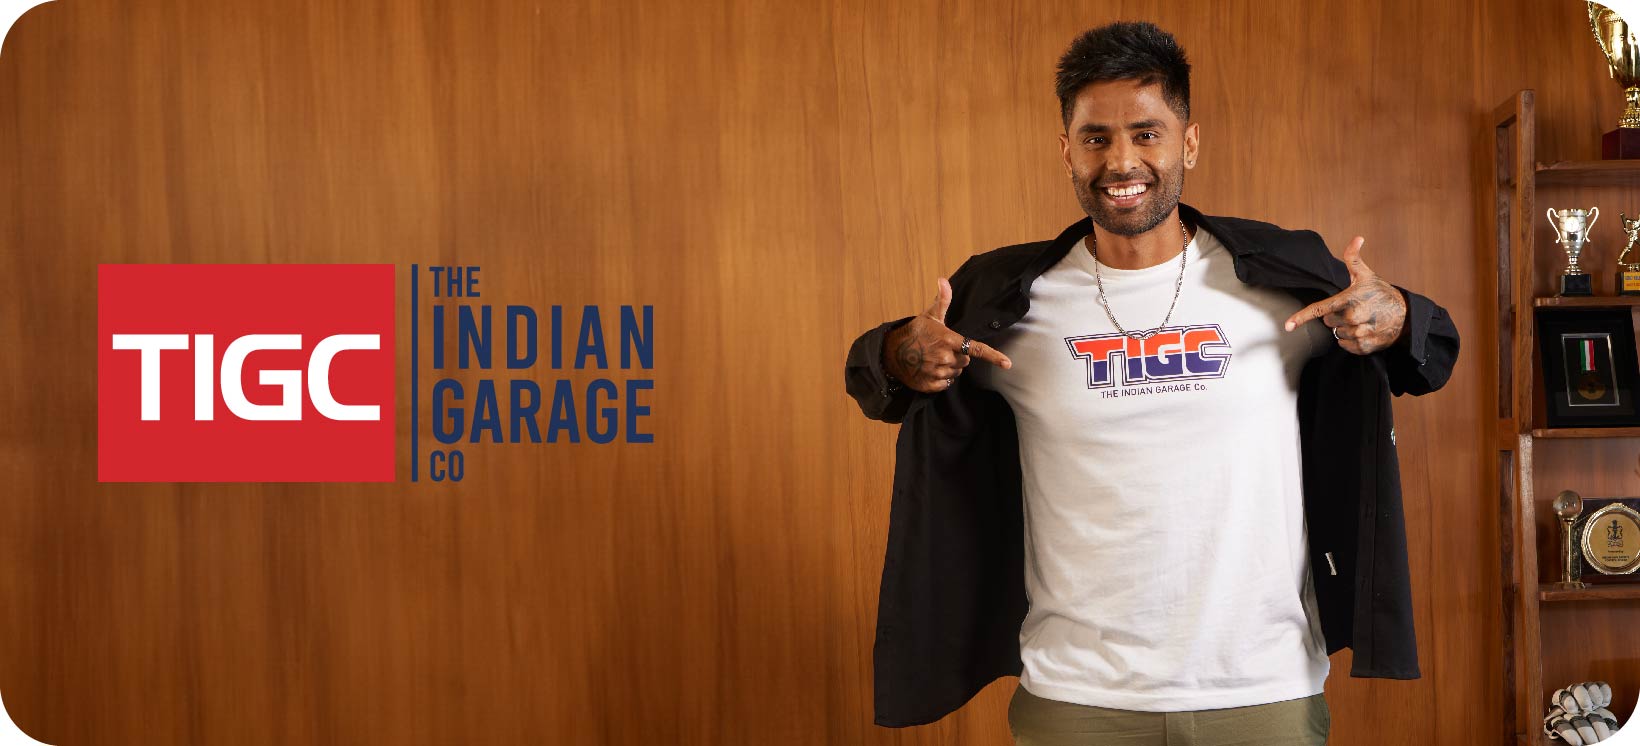 The Indian Garage Co.